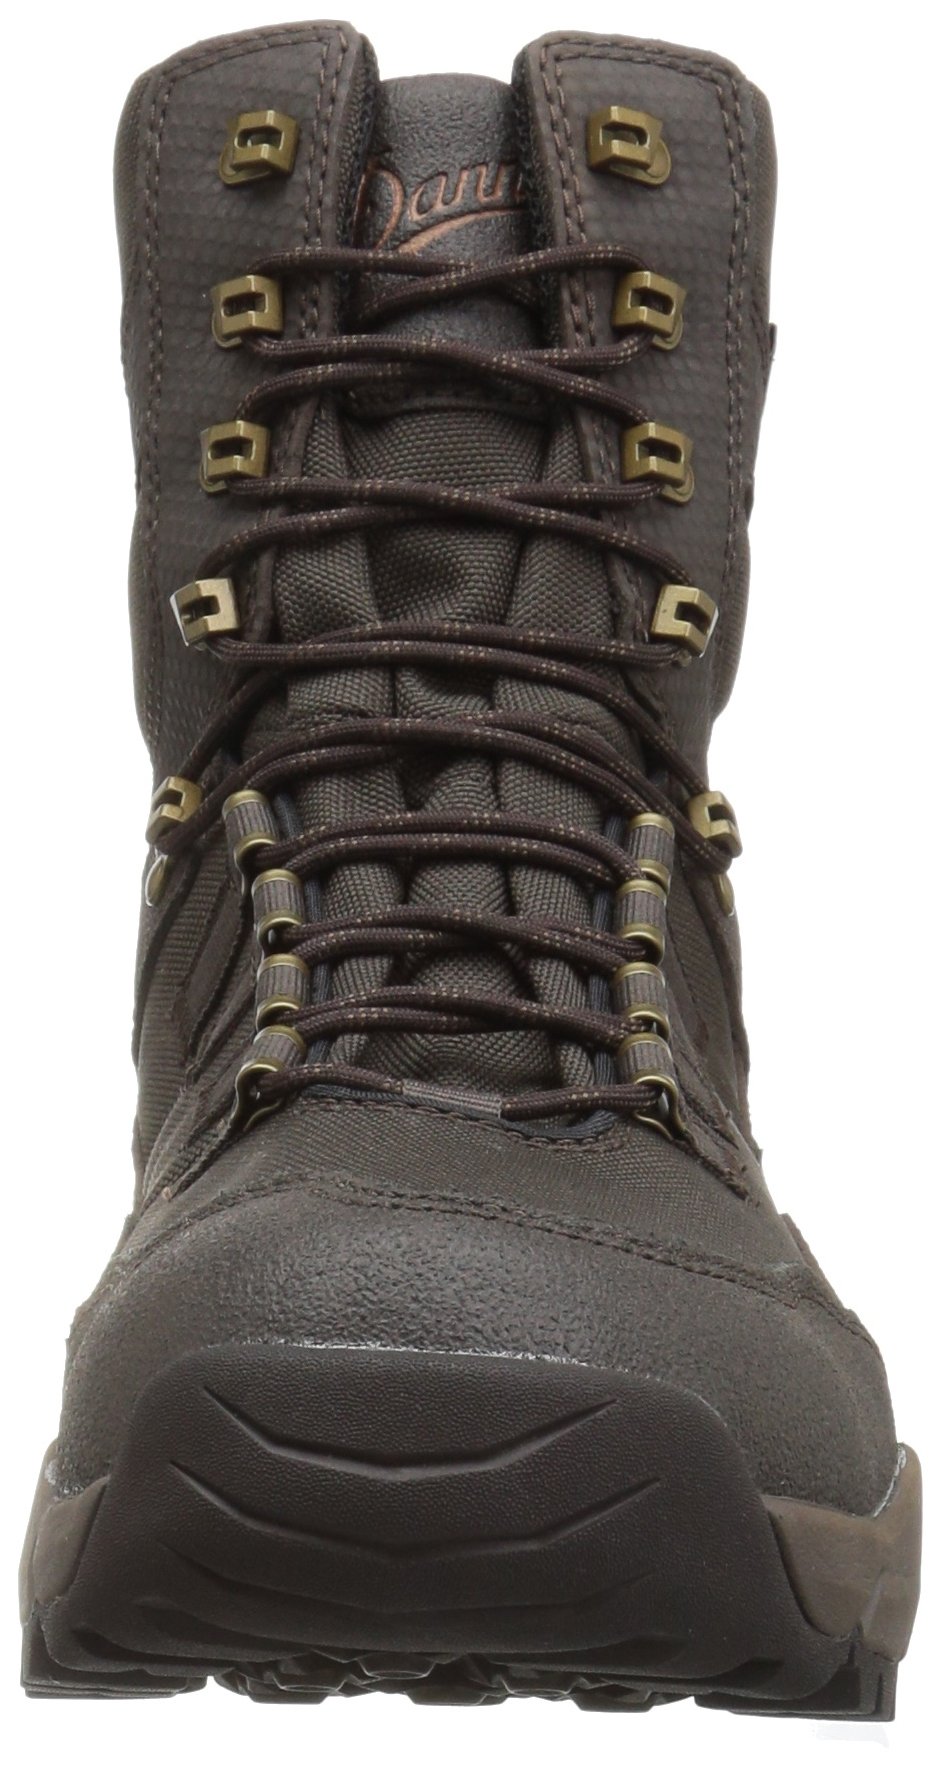 Danner Men's Vital Insulated 800g Hunting Shoes